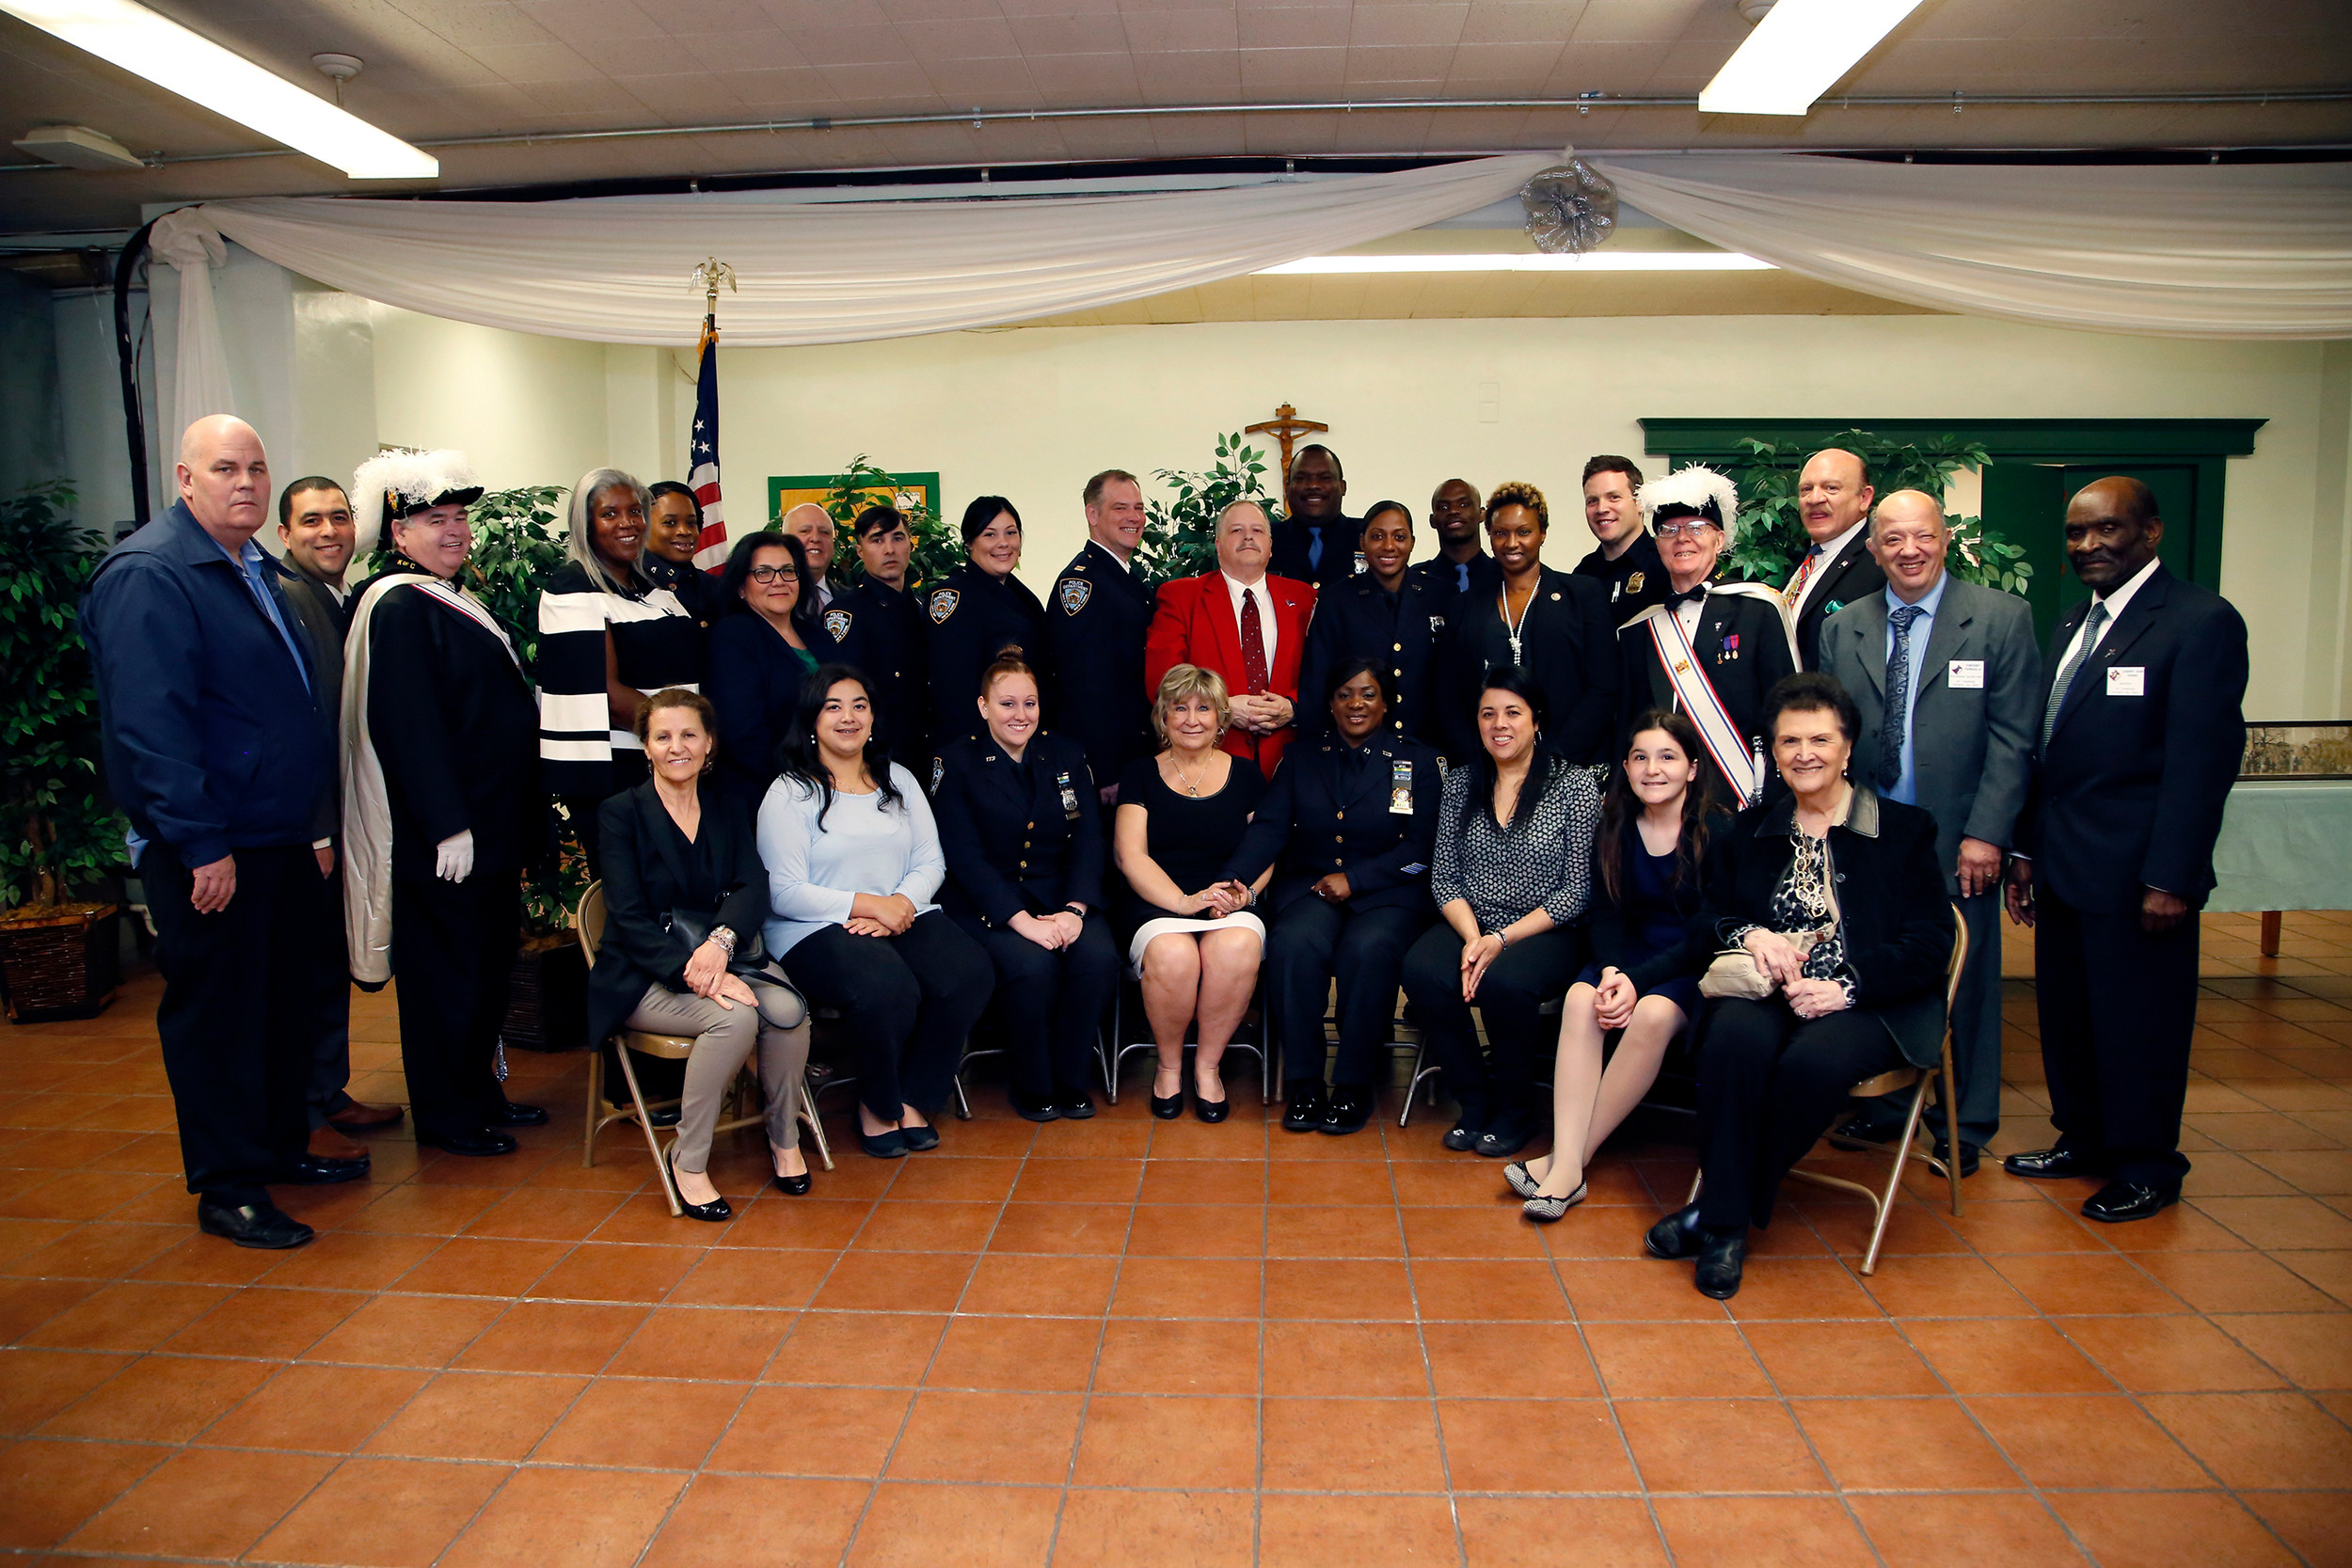 Members of the NYPD, NCPD, widows of fallen officers and Knights of Columbus officers all attended the 90th anniversary breakfast for the Knights of Columbus Saint Therese Council 2622.